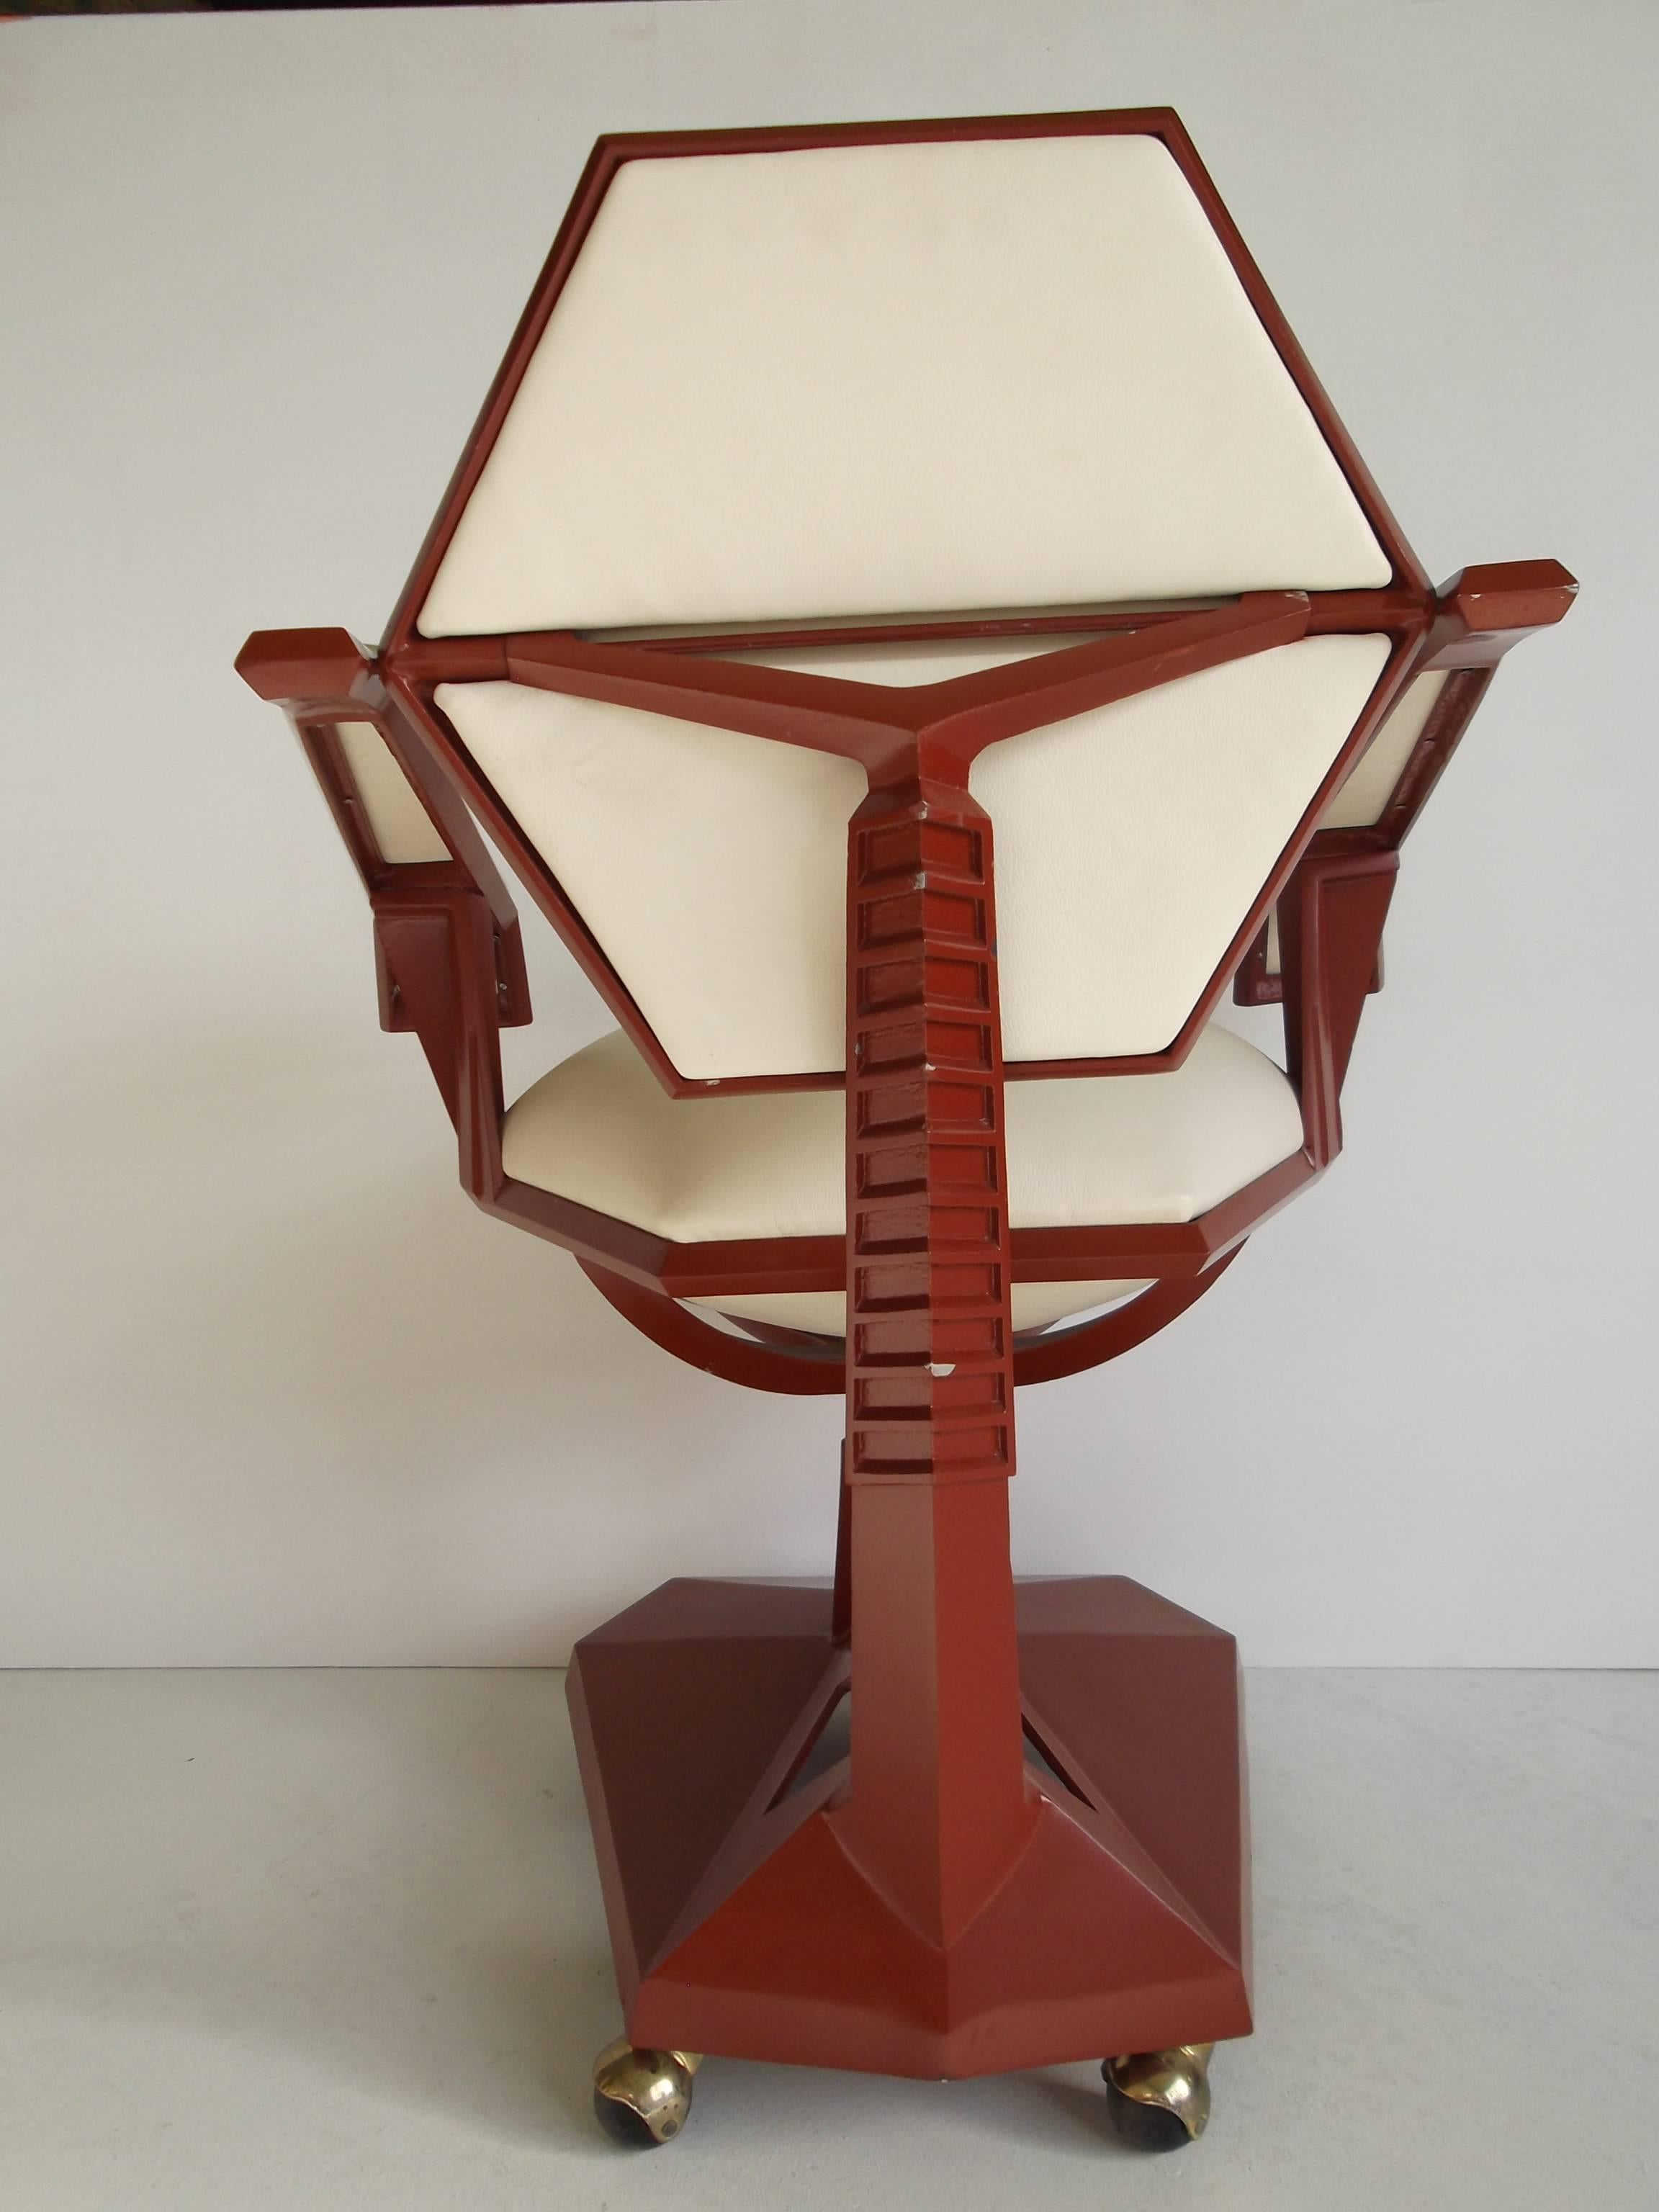 This is a fantastic version of a Frank Lloyd Wright chair, commissioned only for the Price Tower in Bartlesville, Oklahoma. I acquired it directly from Mrs. Price, years ago. It is in Cherokee Red, an actual FLW color! Of all the chair versions out